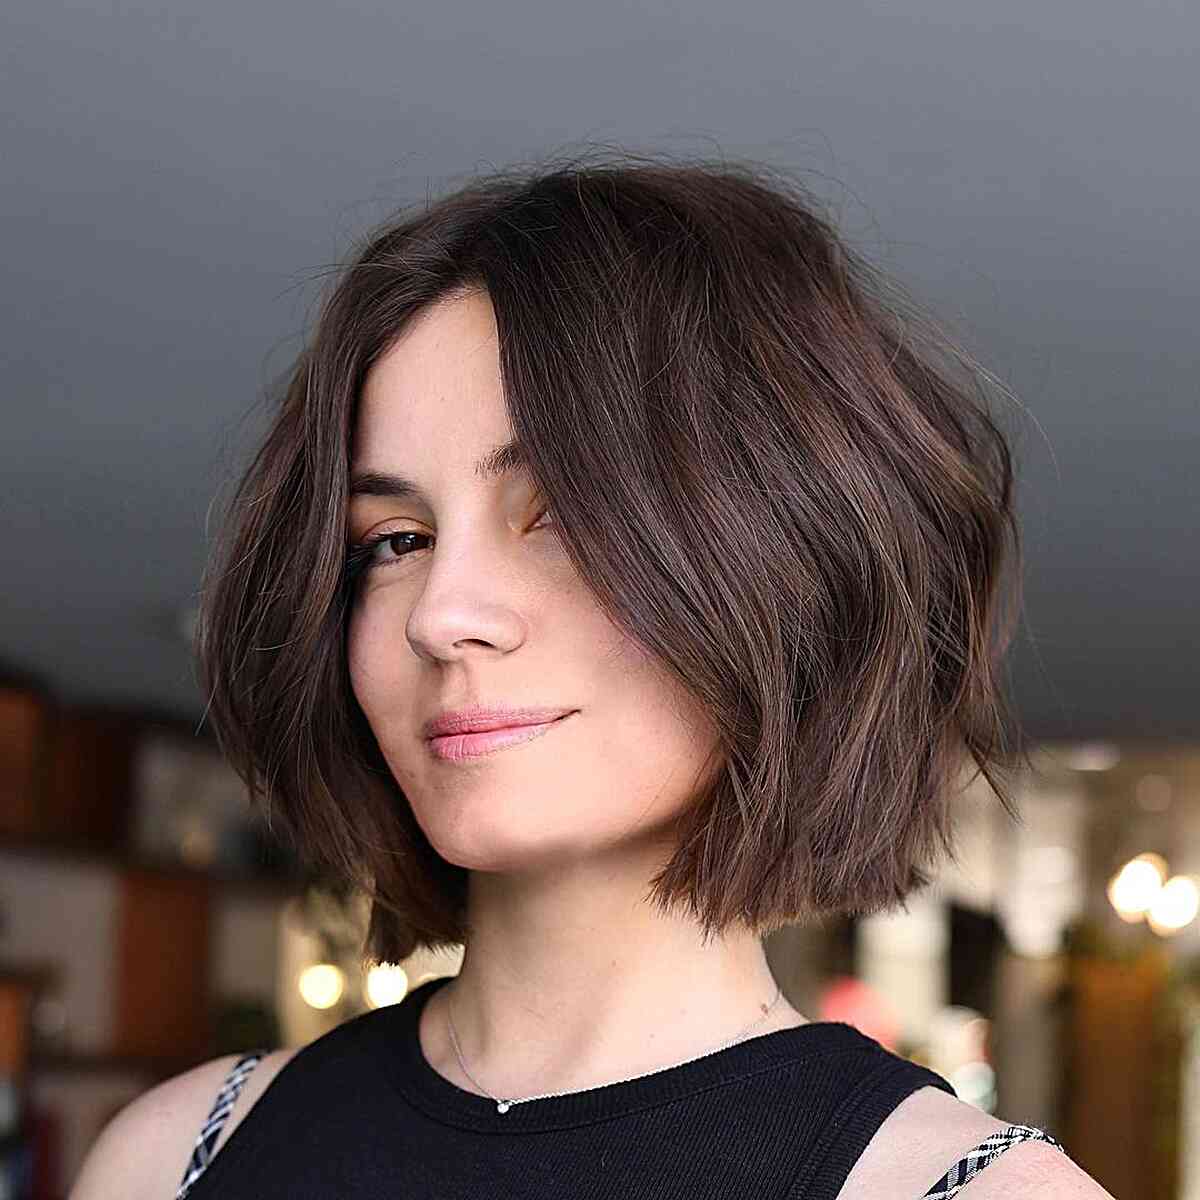 The Neck-Length Modern Bob for Short Hair with a middle part